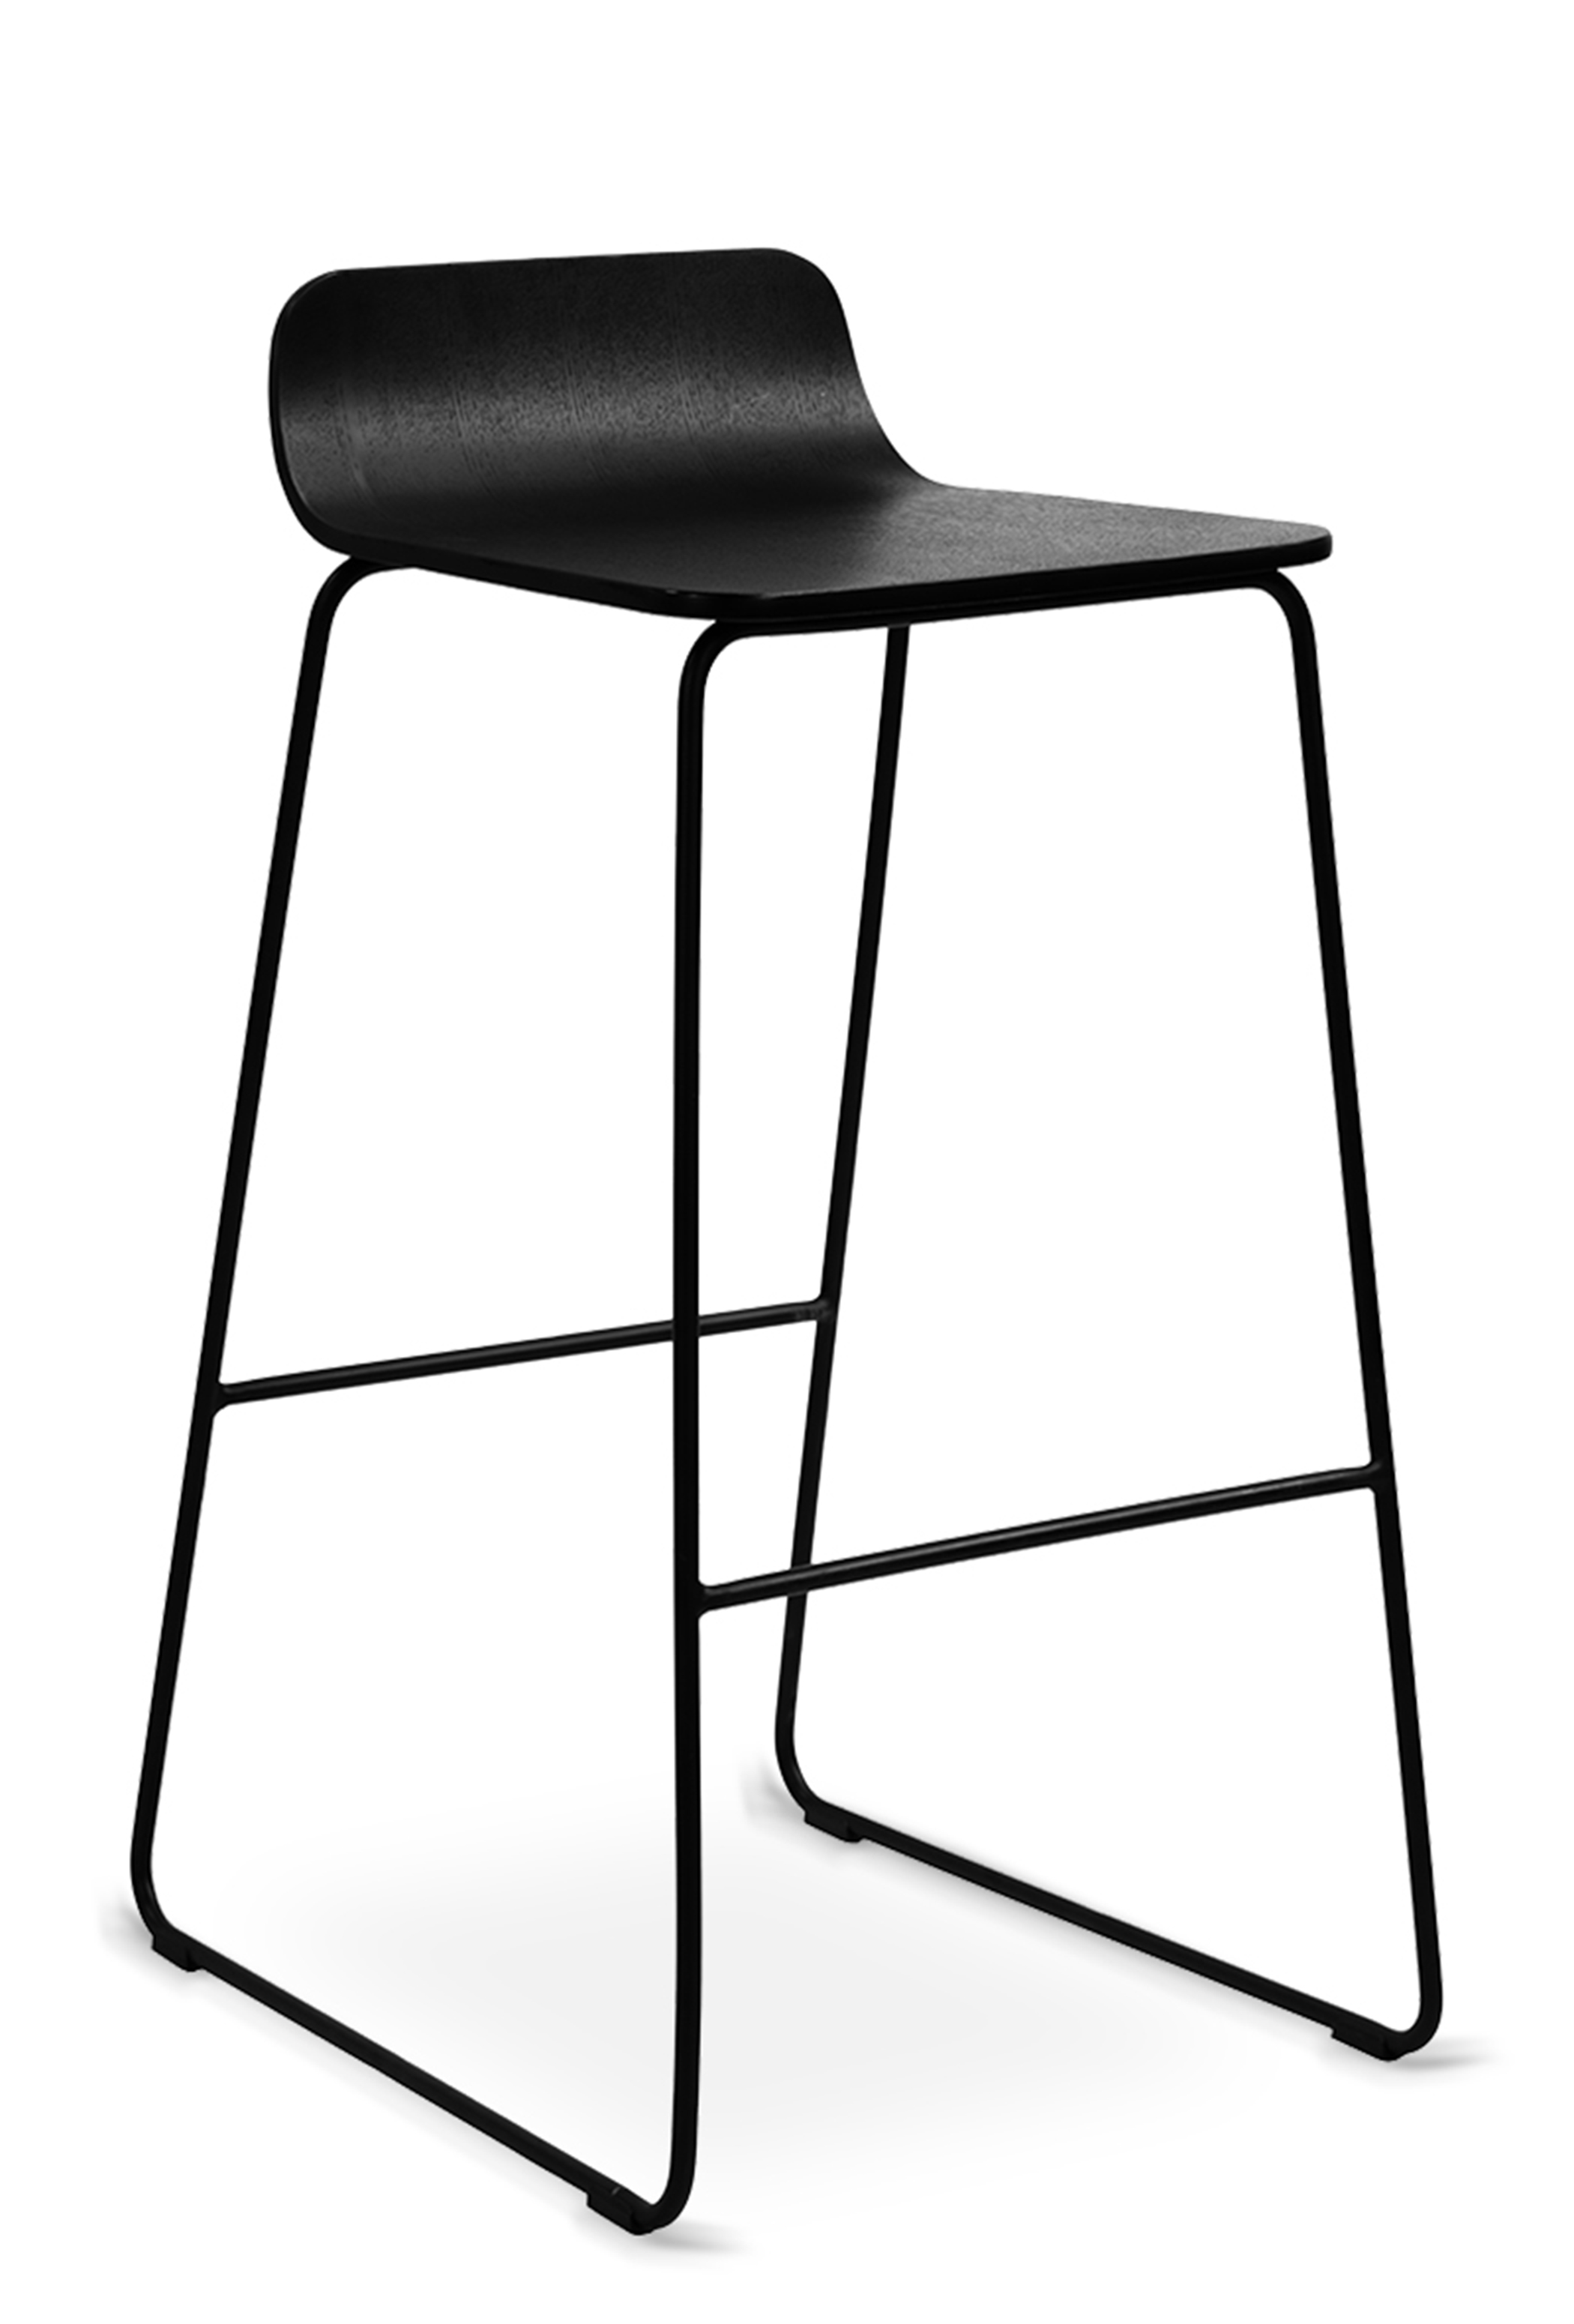 WS - Lolli high stool - Black ash (Front angle)